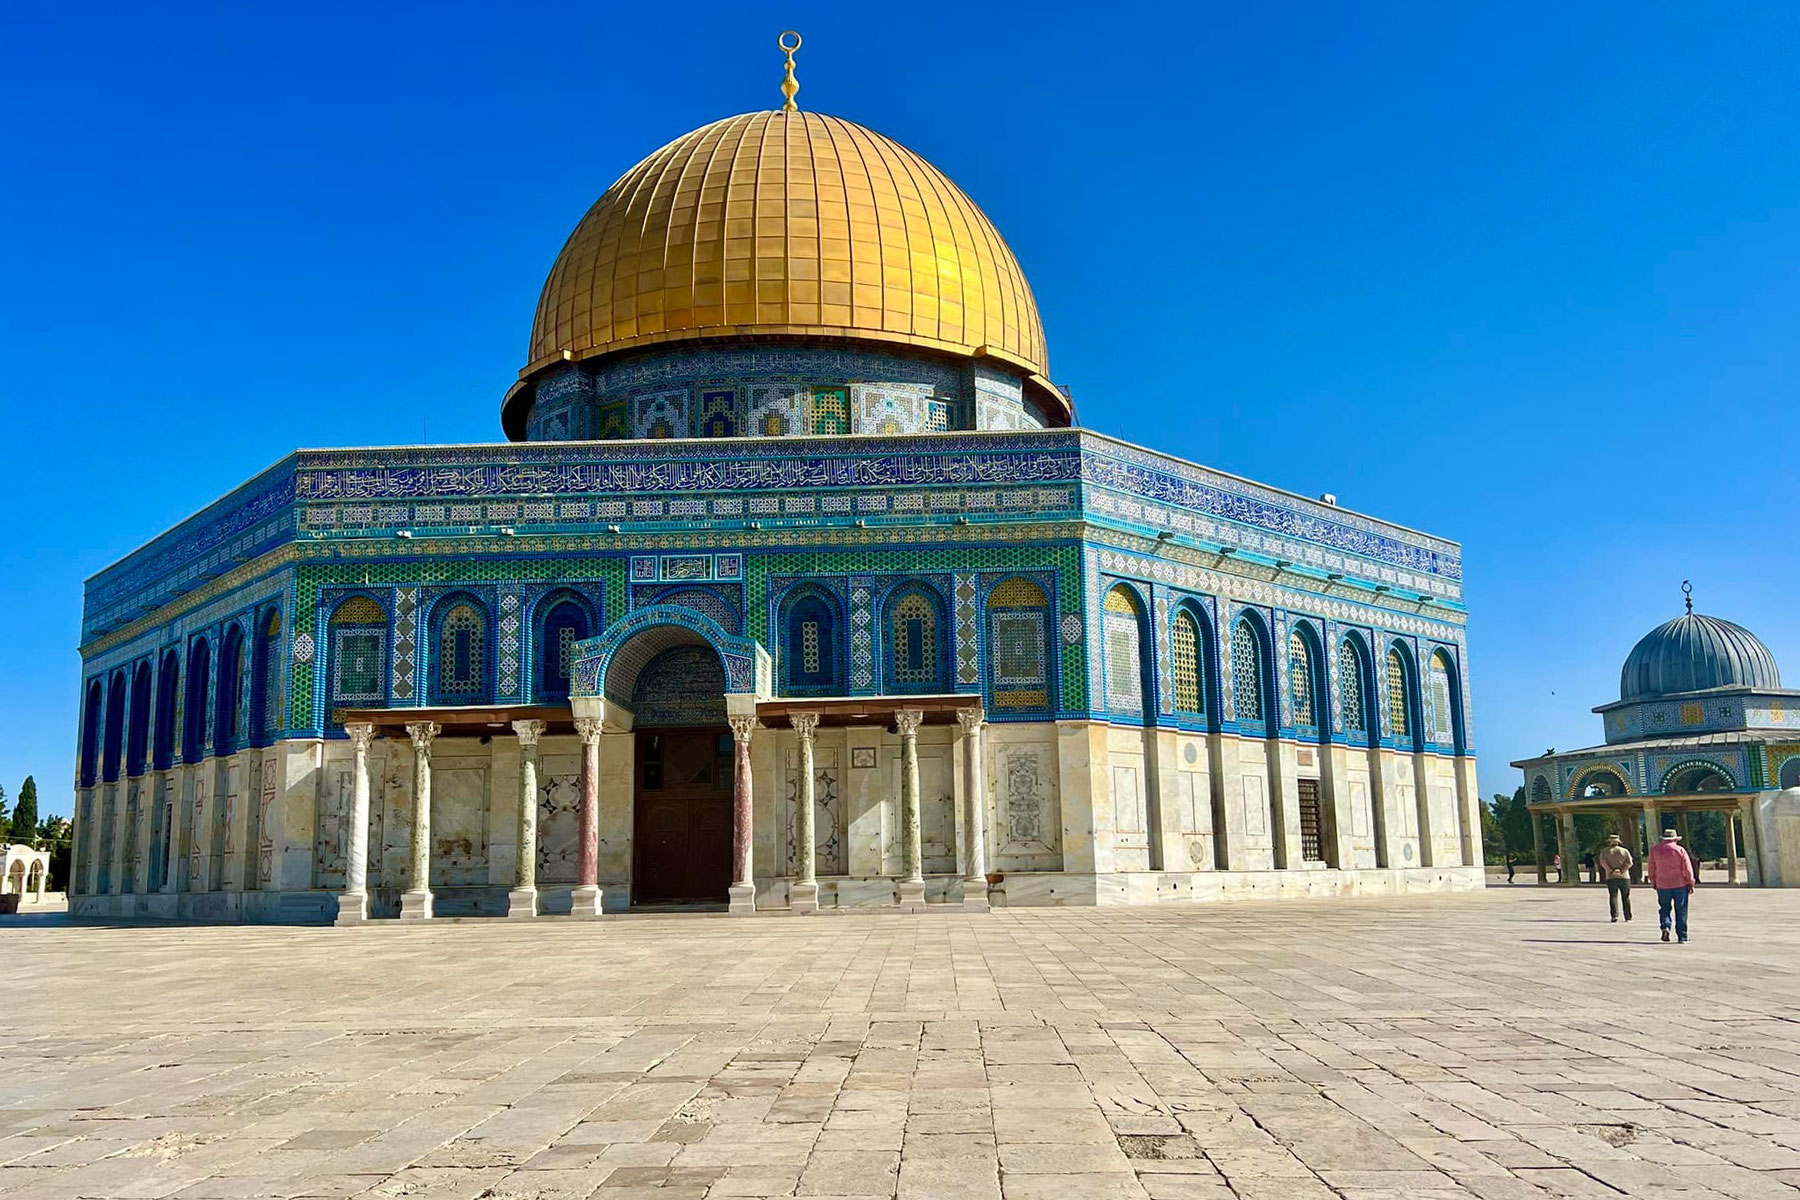 Picture of the Dome of the Rock